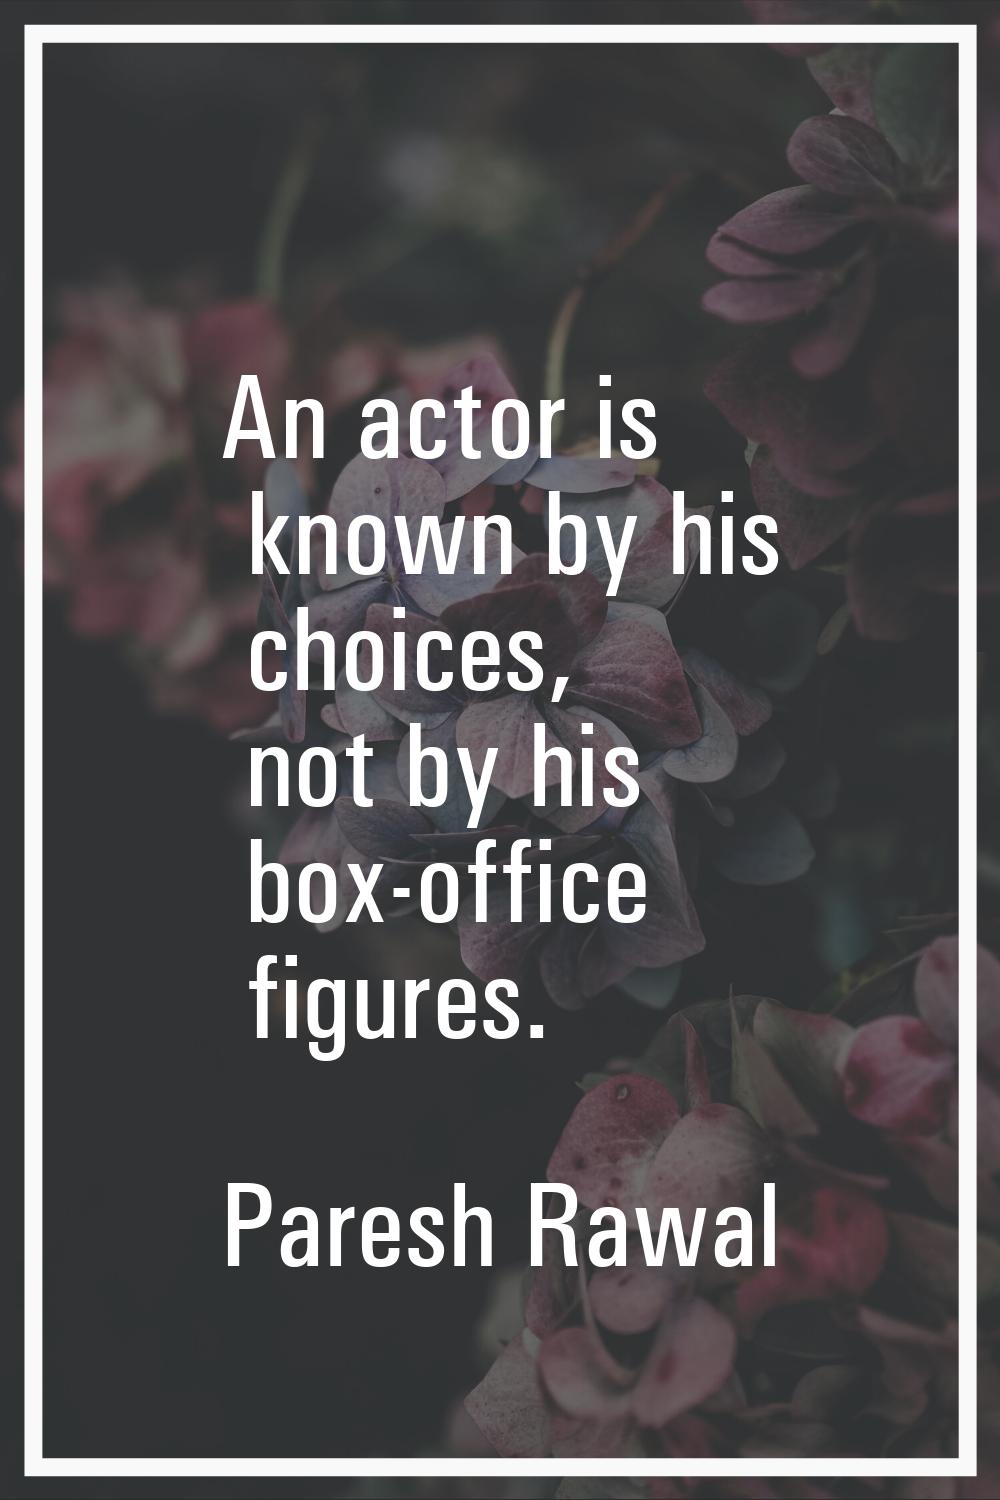 An actor is known by his choices, not by his box-office figures.